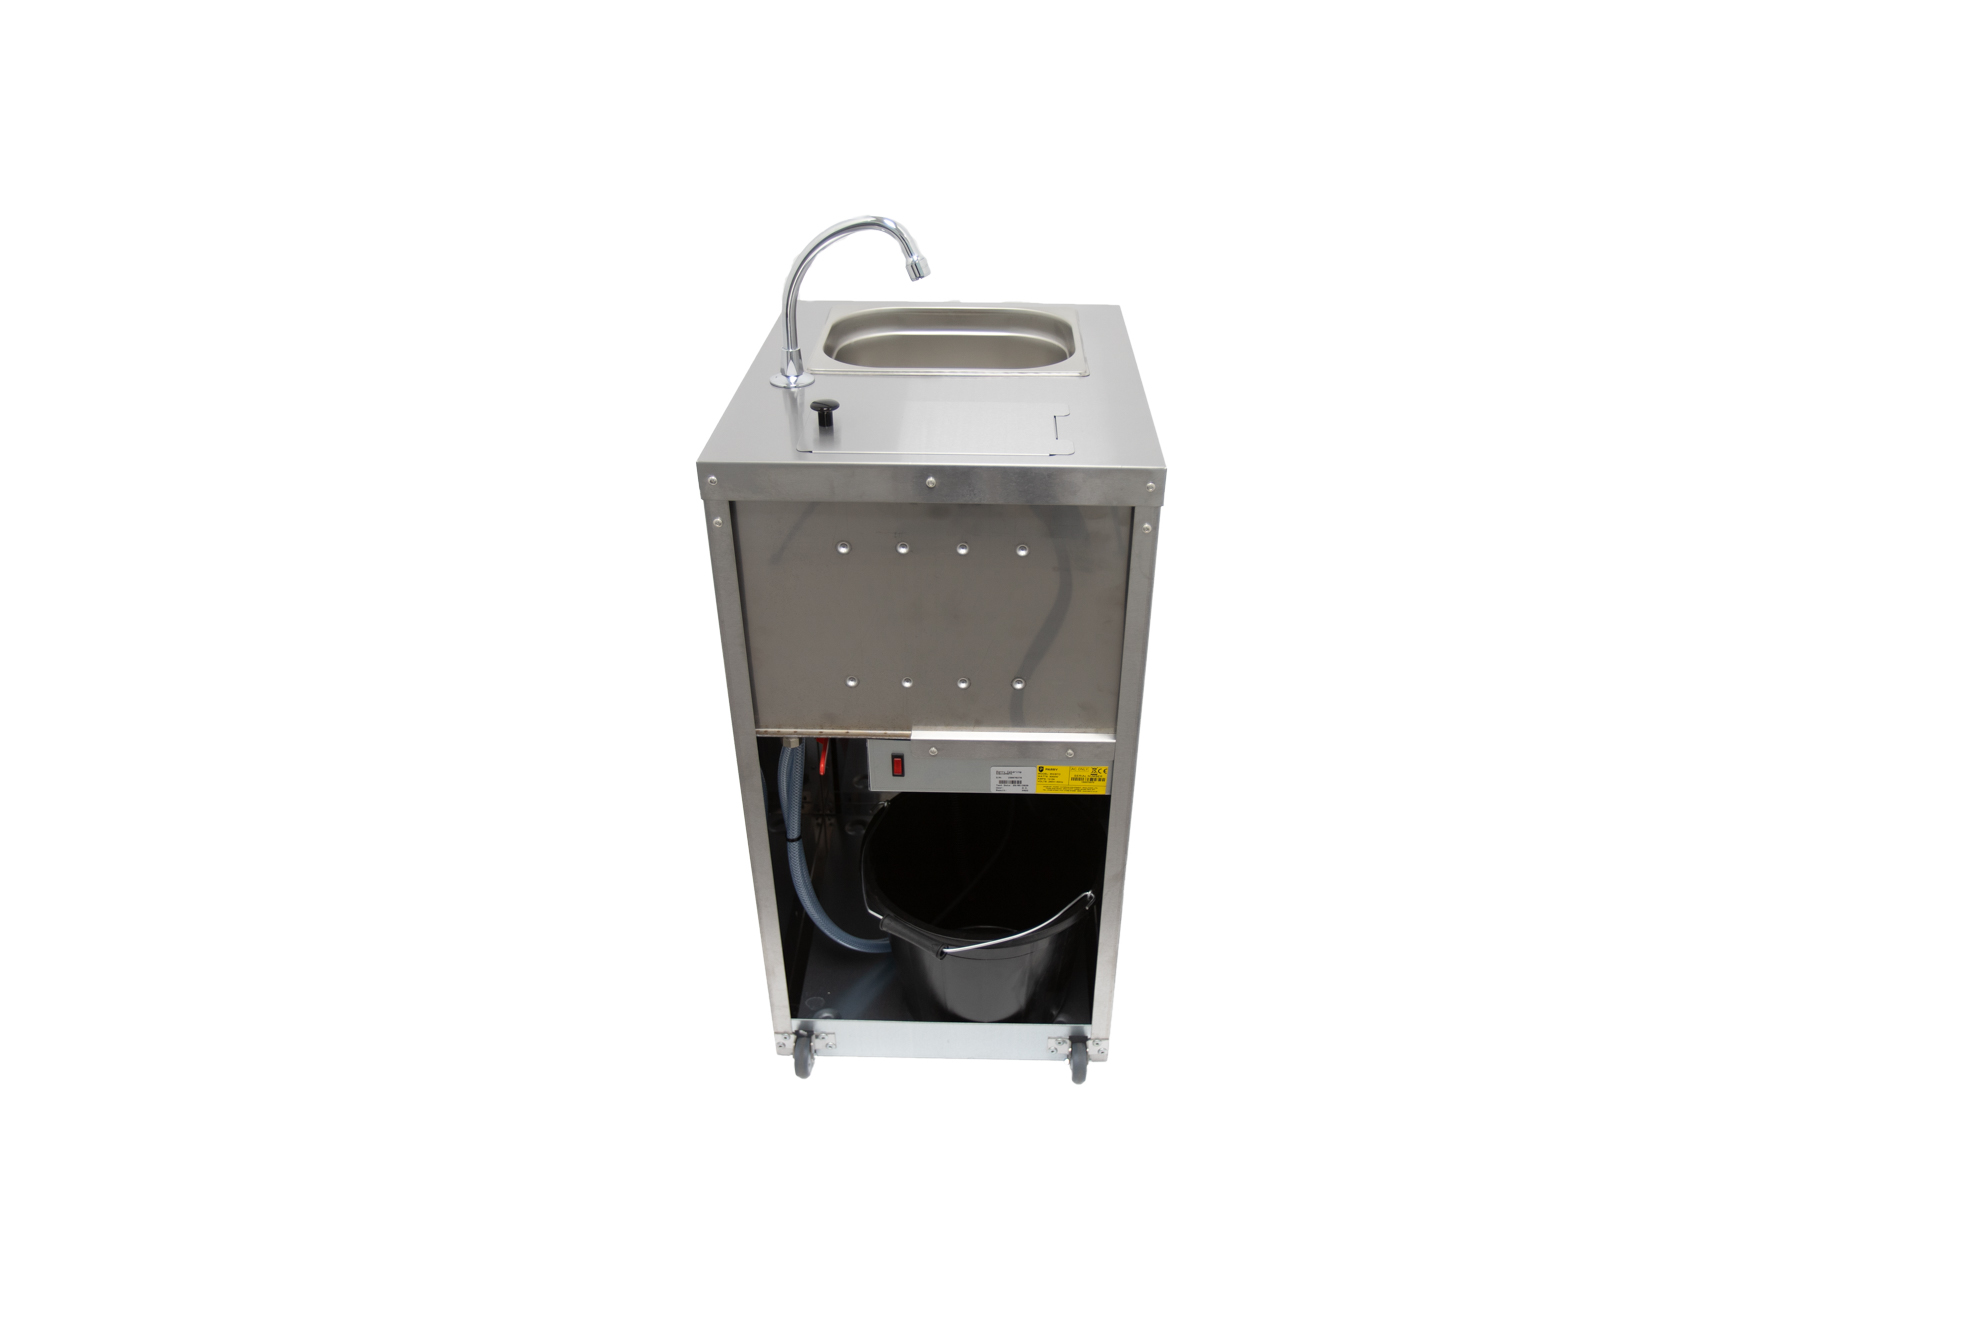 Parry MWBTD - Heated Mobile Wash Basin with Door